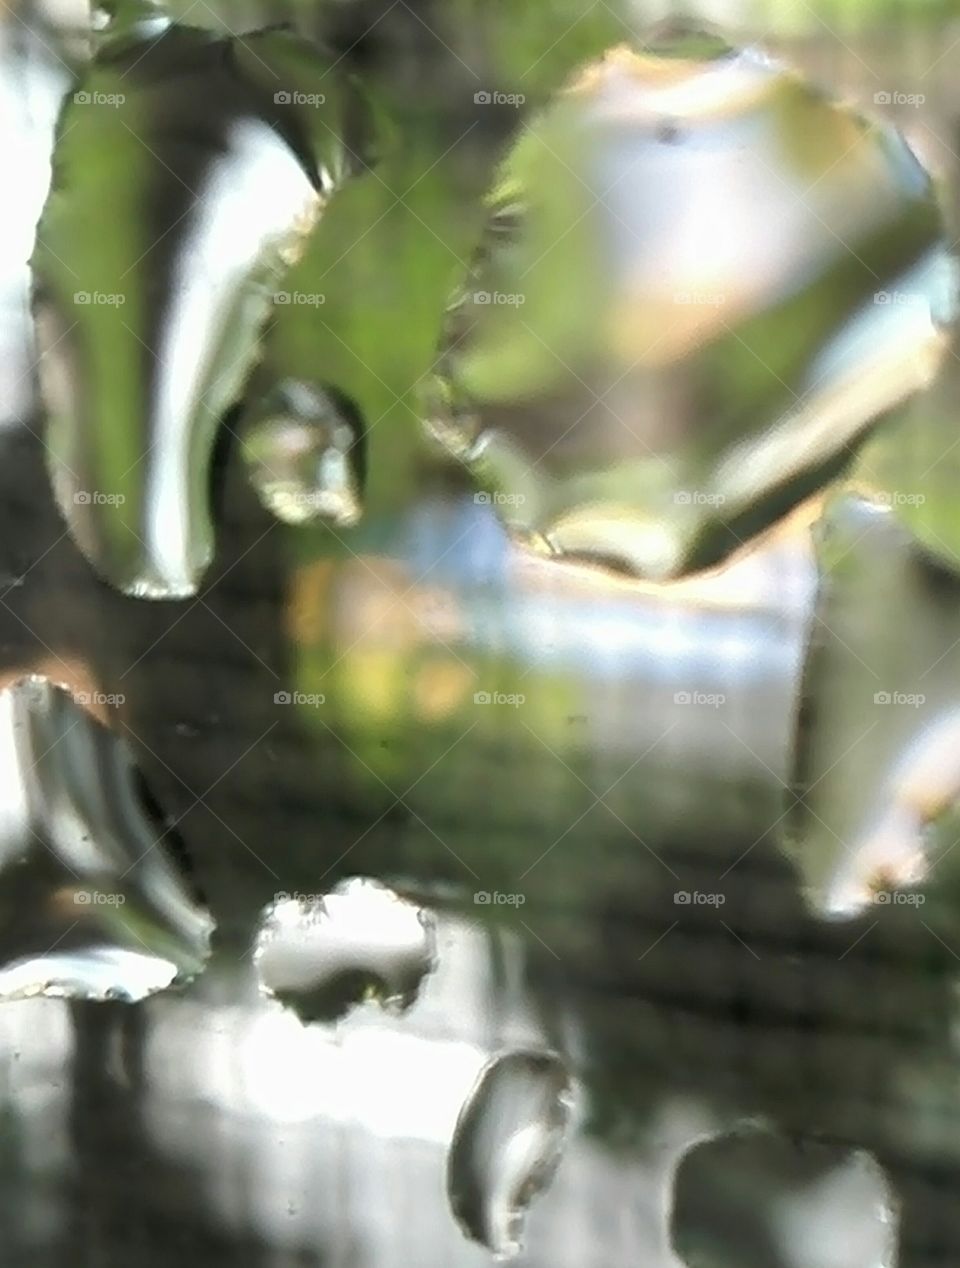 Waterdrops on window glass. Interplays of water, double-glass window, and focusing system may produced some distortion.